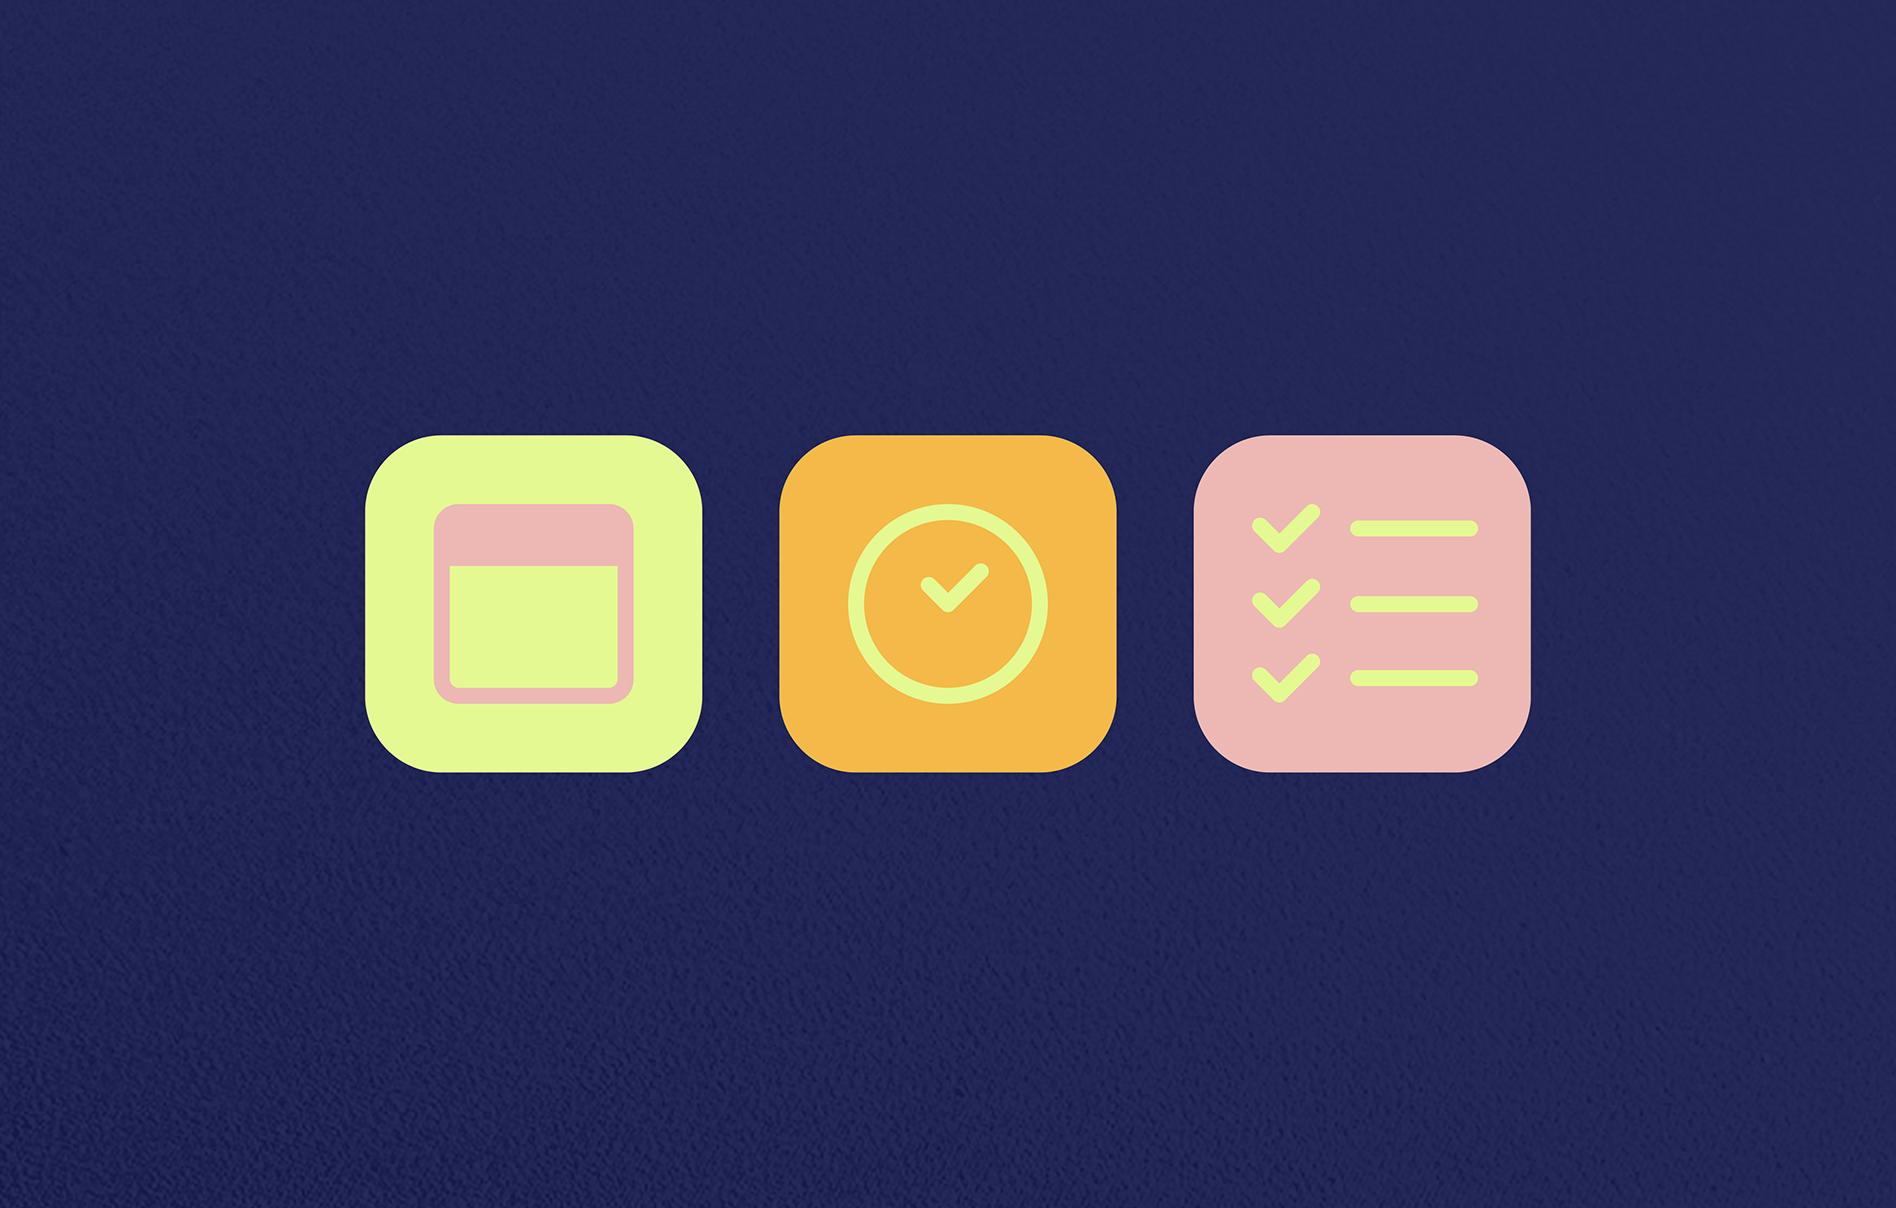 Three scheduling app icons